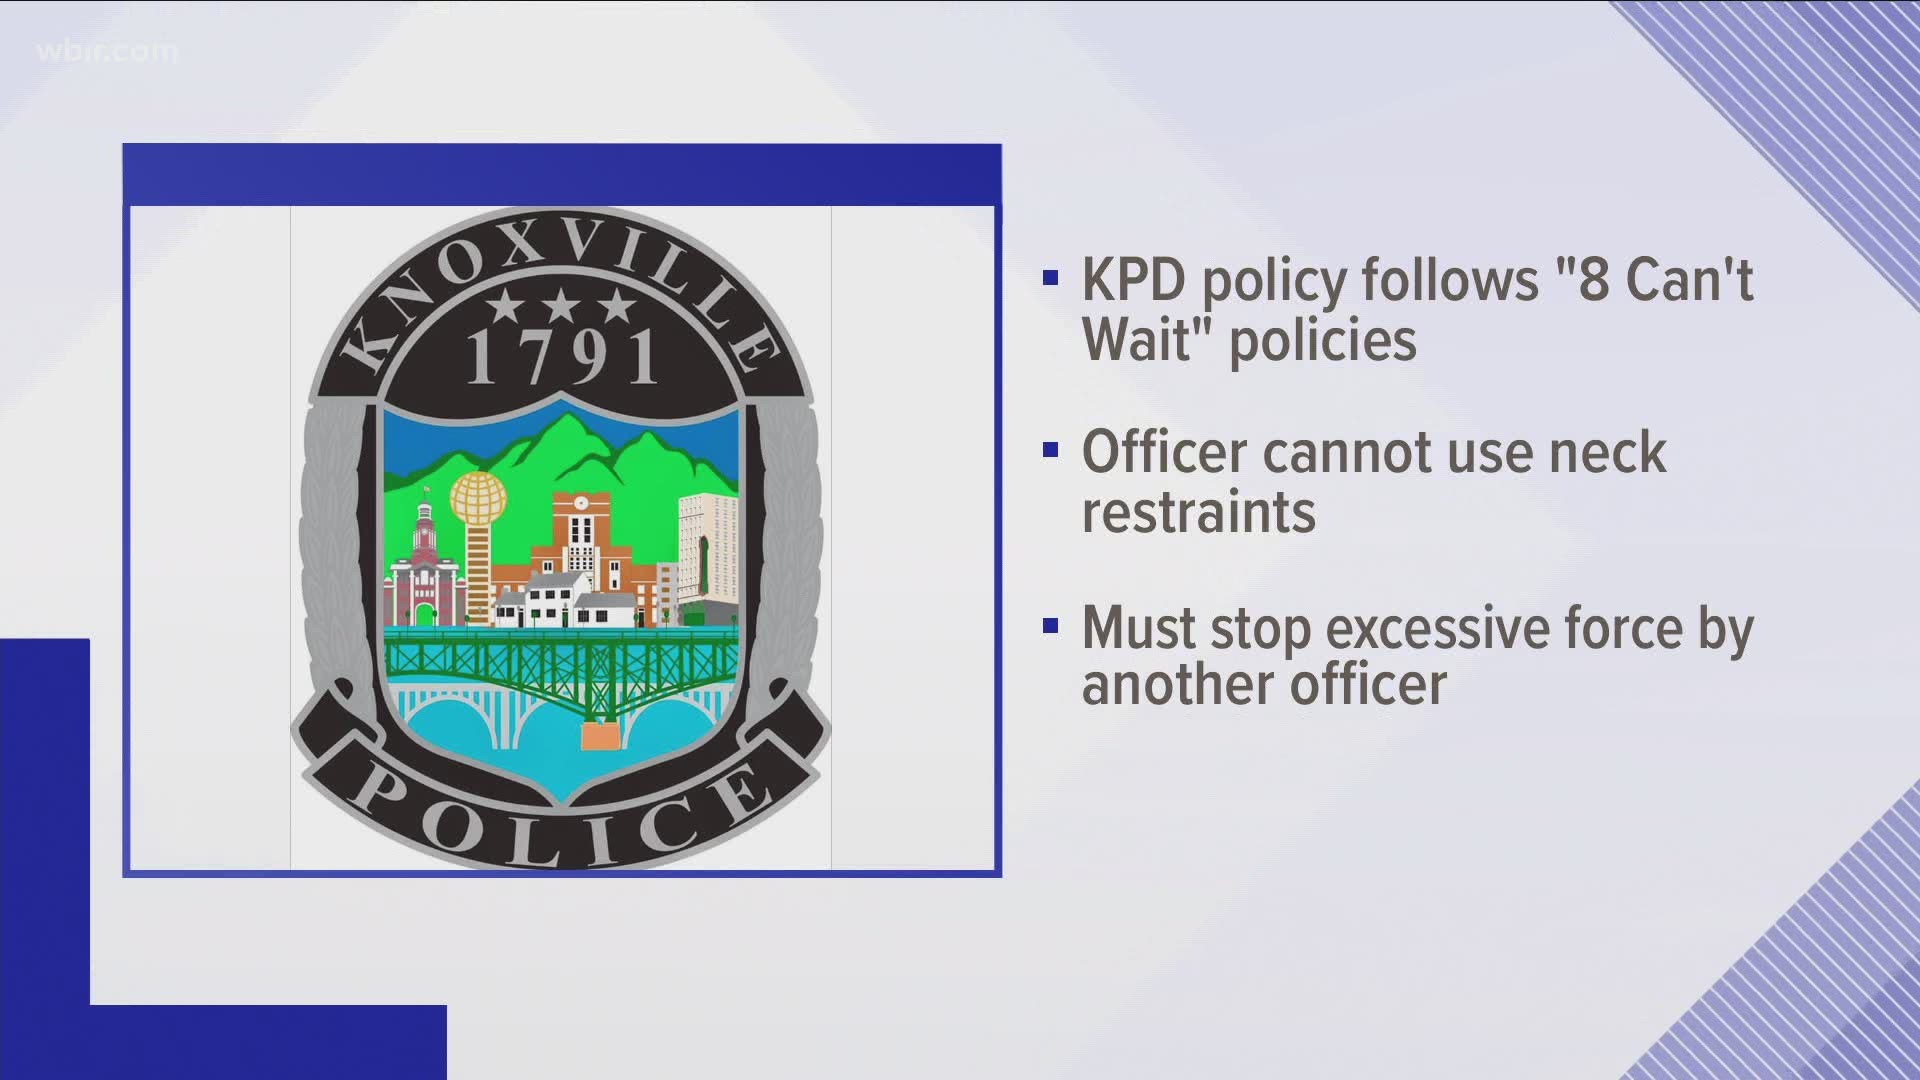 During a Facebook Live, Knoxville mayor Indya Kincannon says KPD's use of force policy follows all the 8 can't wait polices.